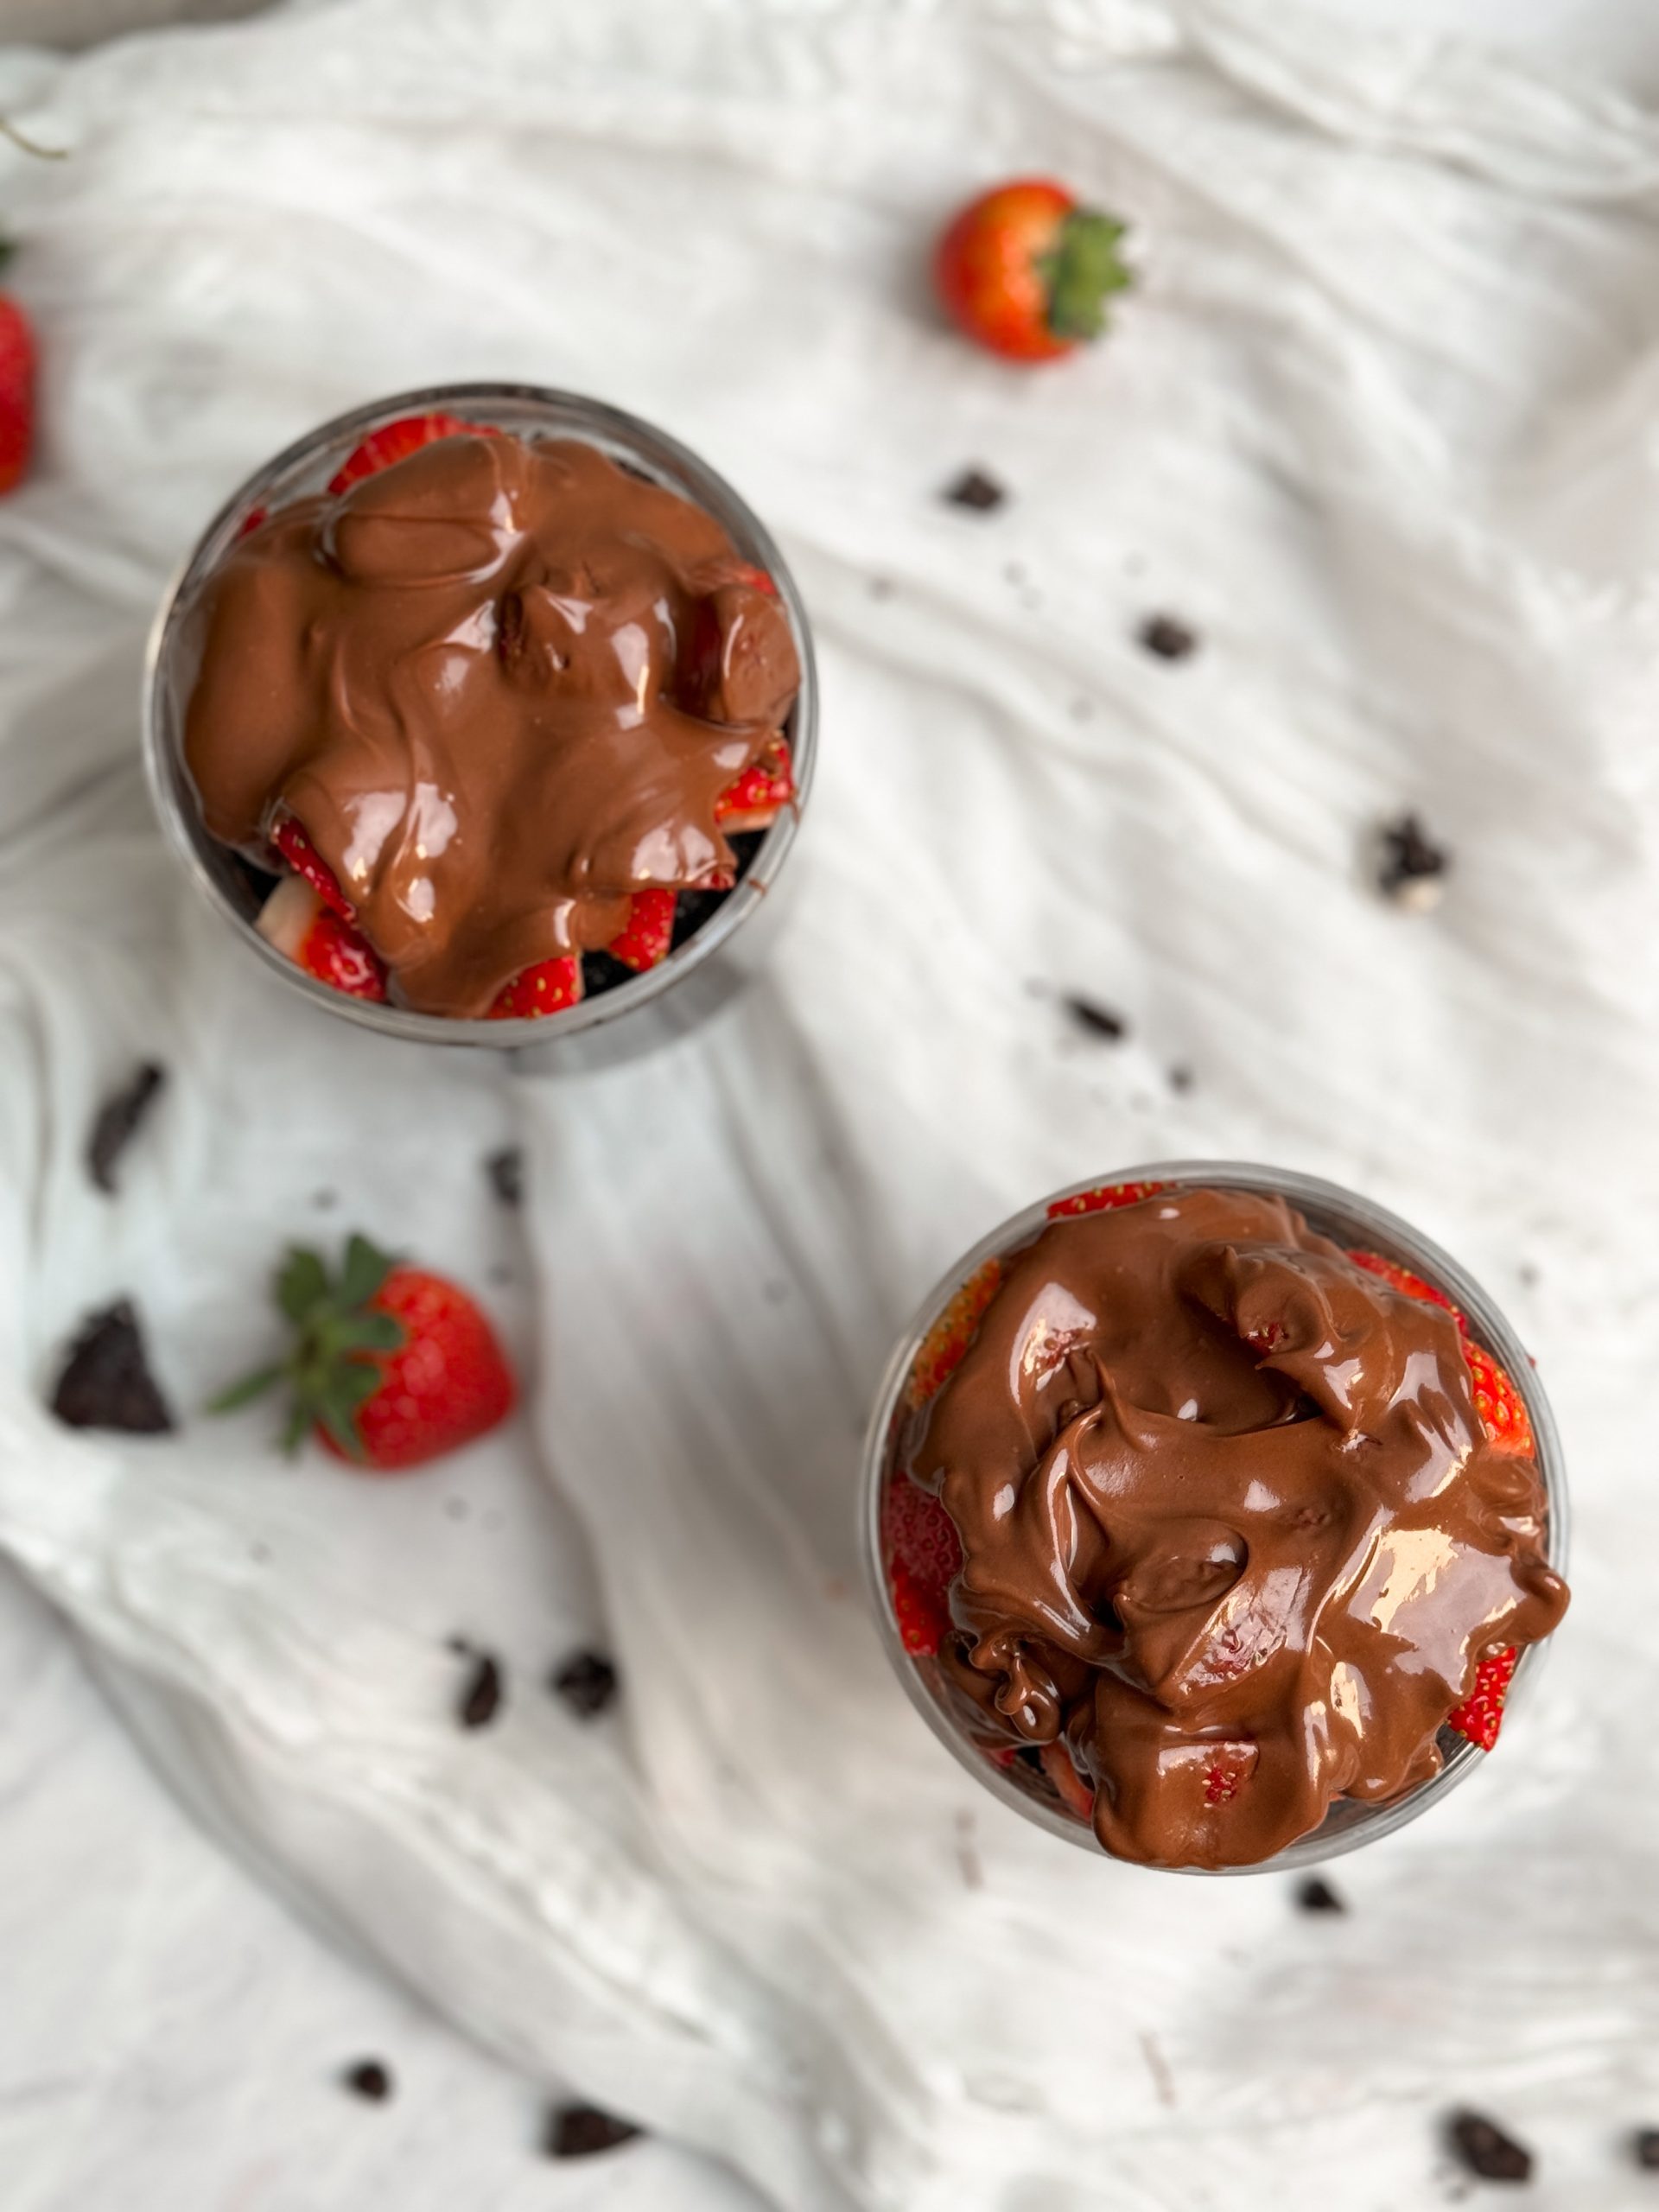 2 glass cups with chocolate strawberry mug cakes inside. moist chocolate cake topped with chopped strawberries and melted chocolate, picture from top